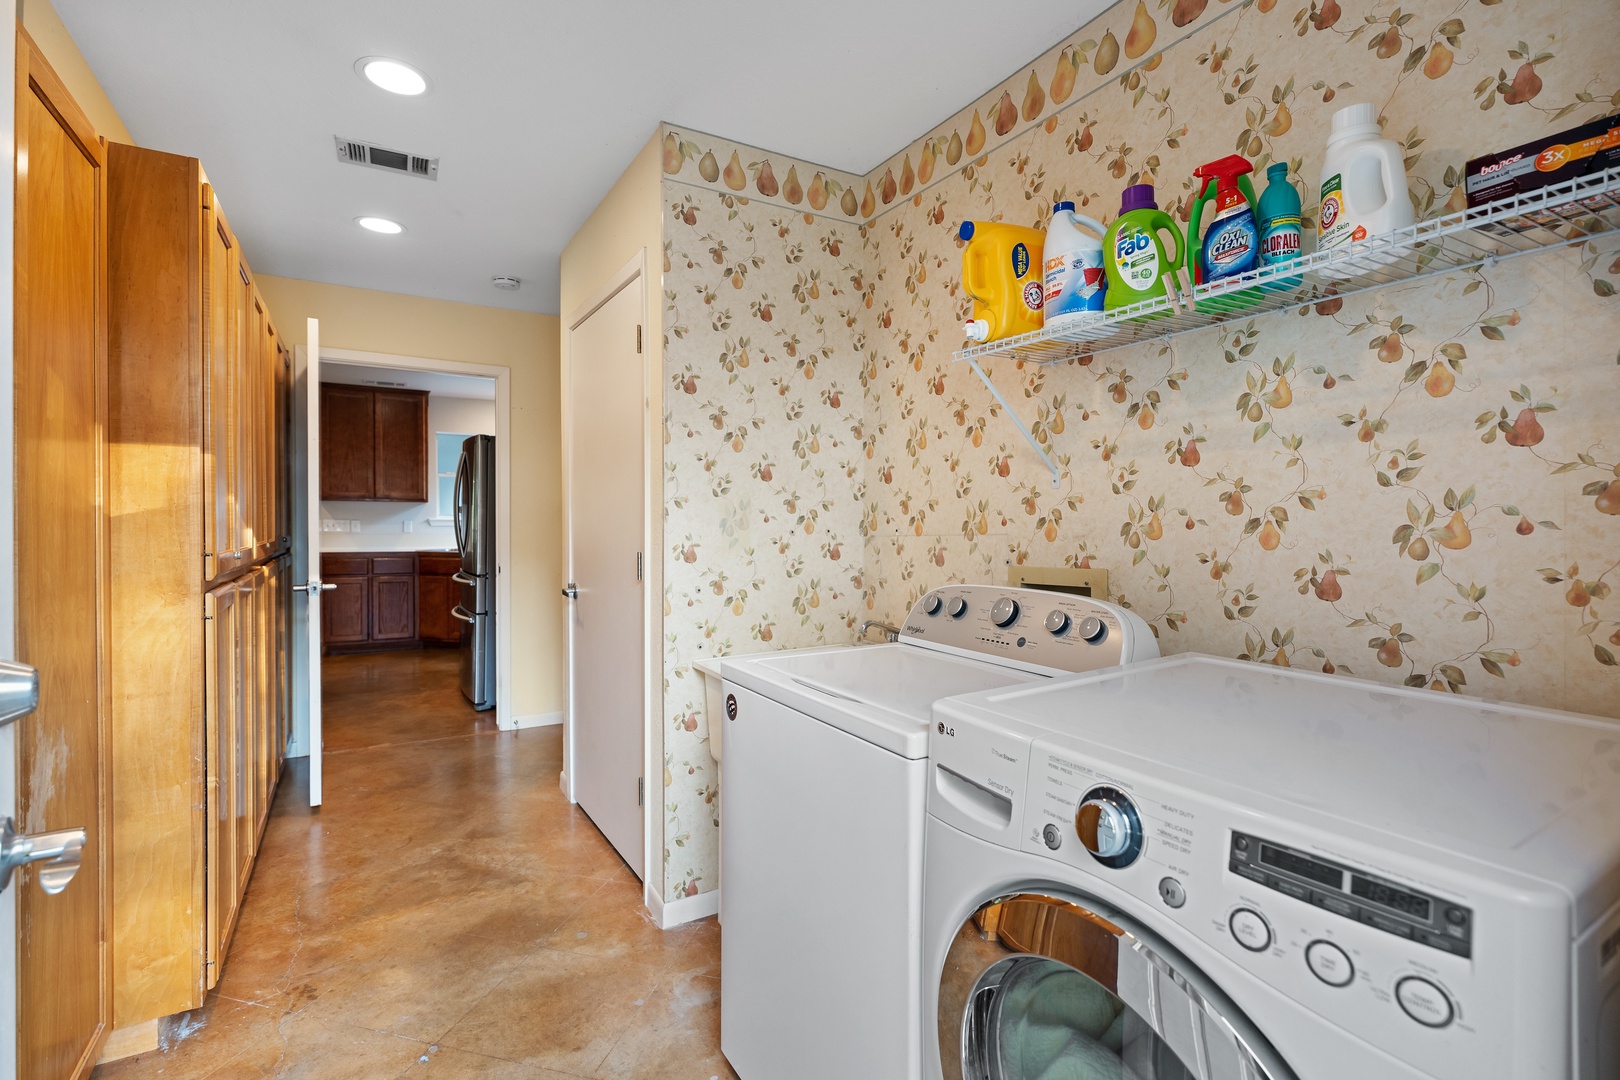 Private laundry is available for your stay, located in the laundry room